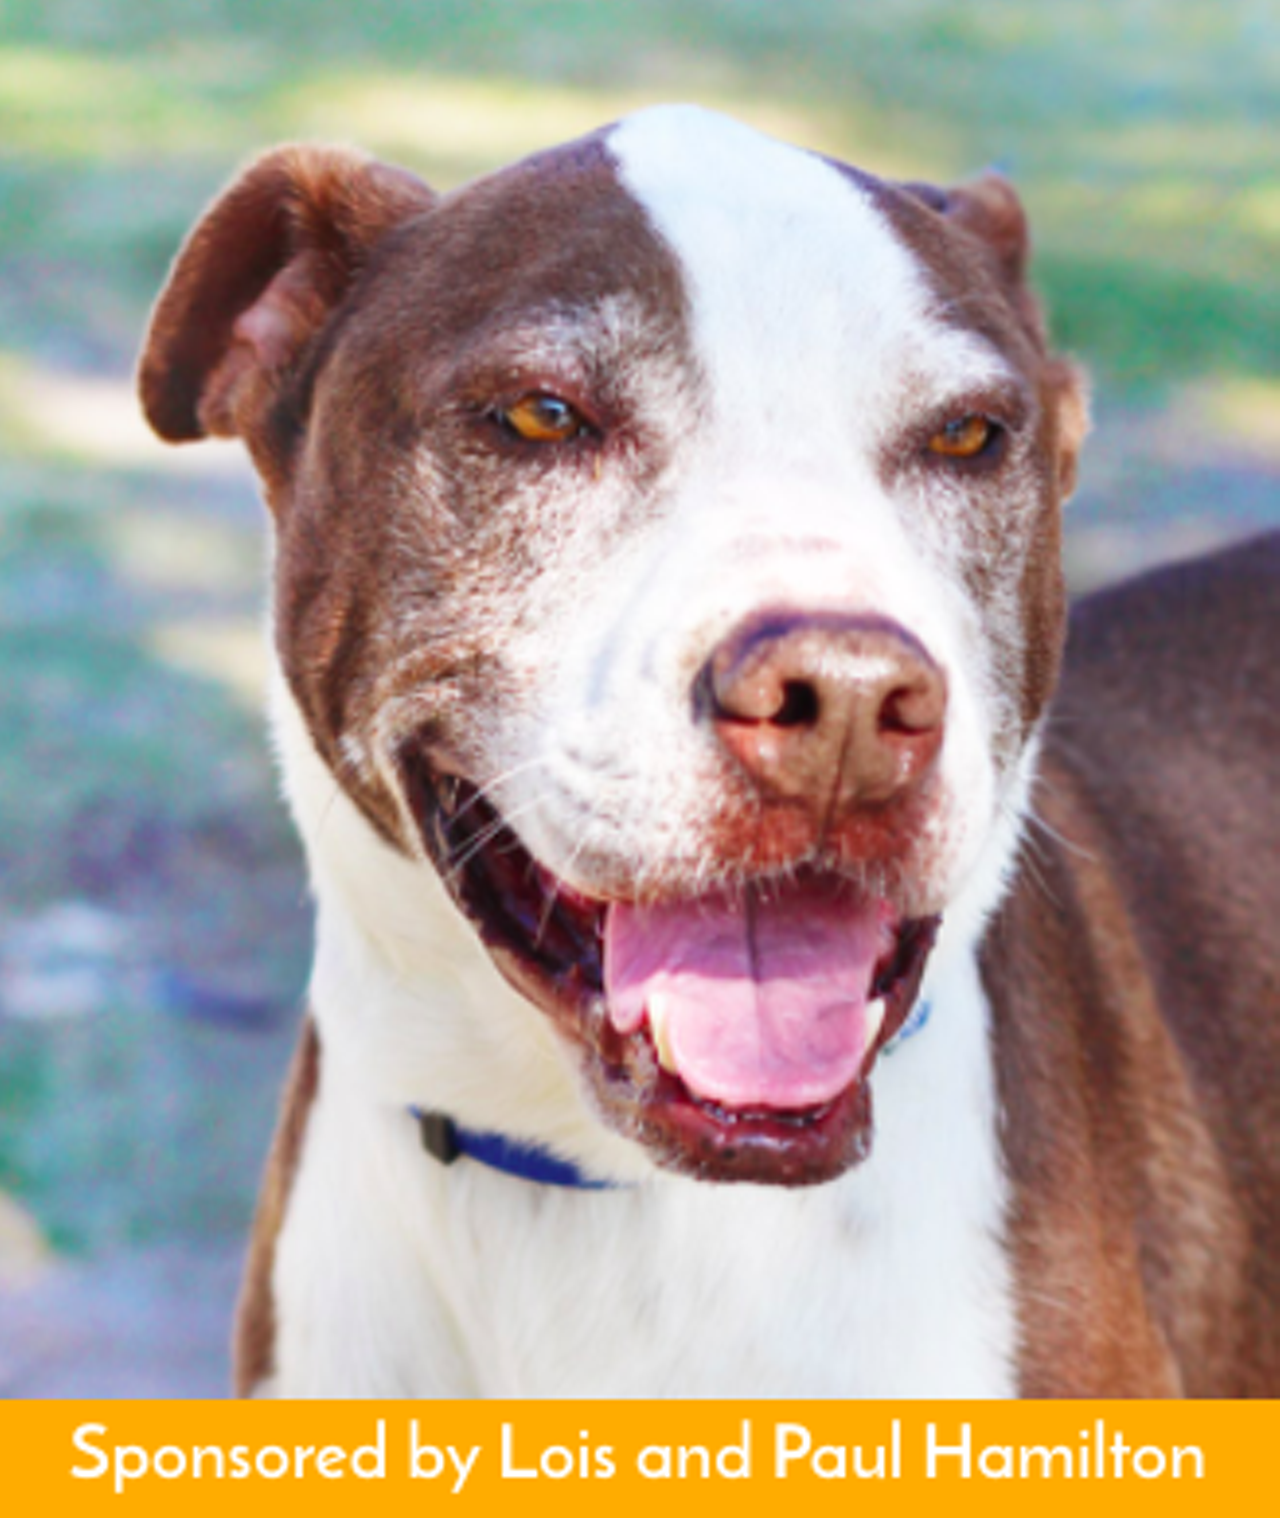 Dexter
"Hi, I’m Dexter! You want to play?!  I usually wiggle and smile when I see people. That’s why I’m smiling in my photos! I was happy to have my photo taken and be around people. Come by and see how excited I get when you meet me! I’ll be ready to greet you with a smile!"